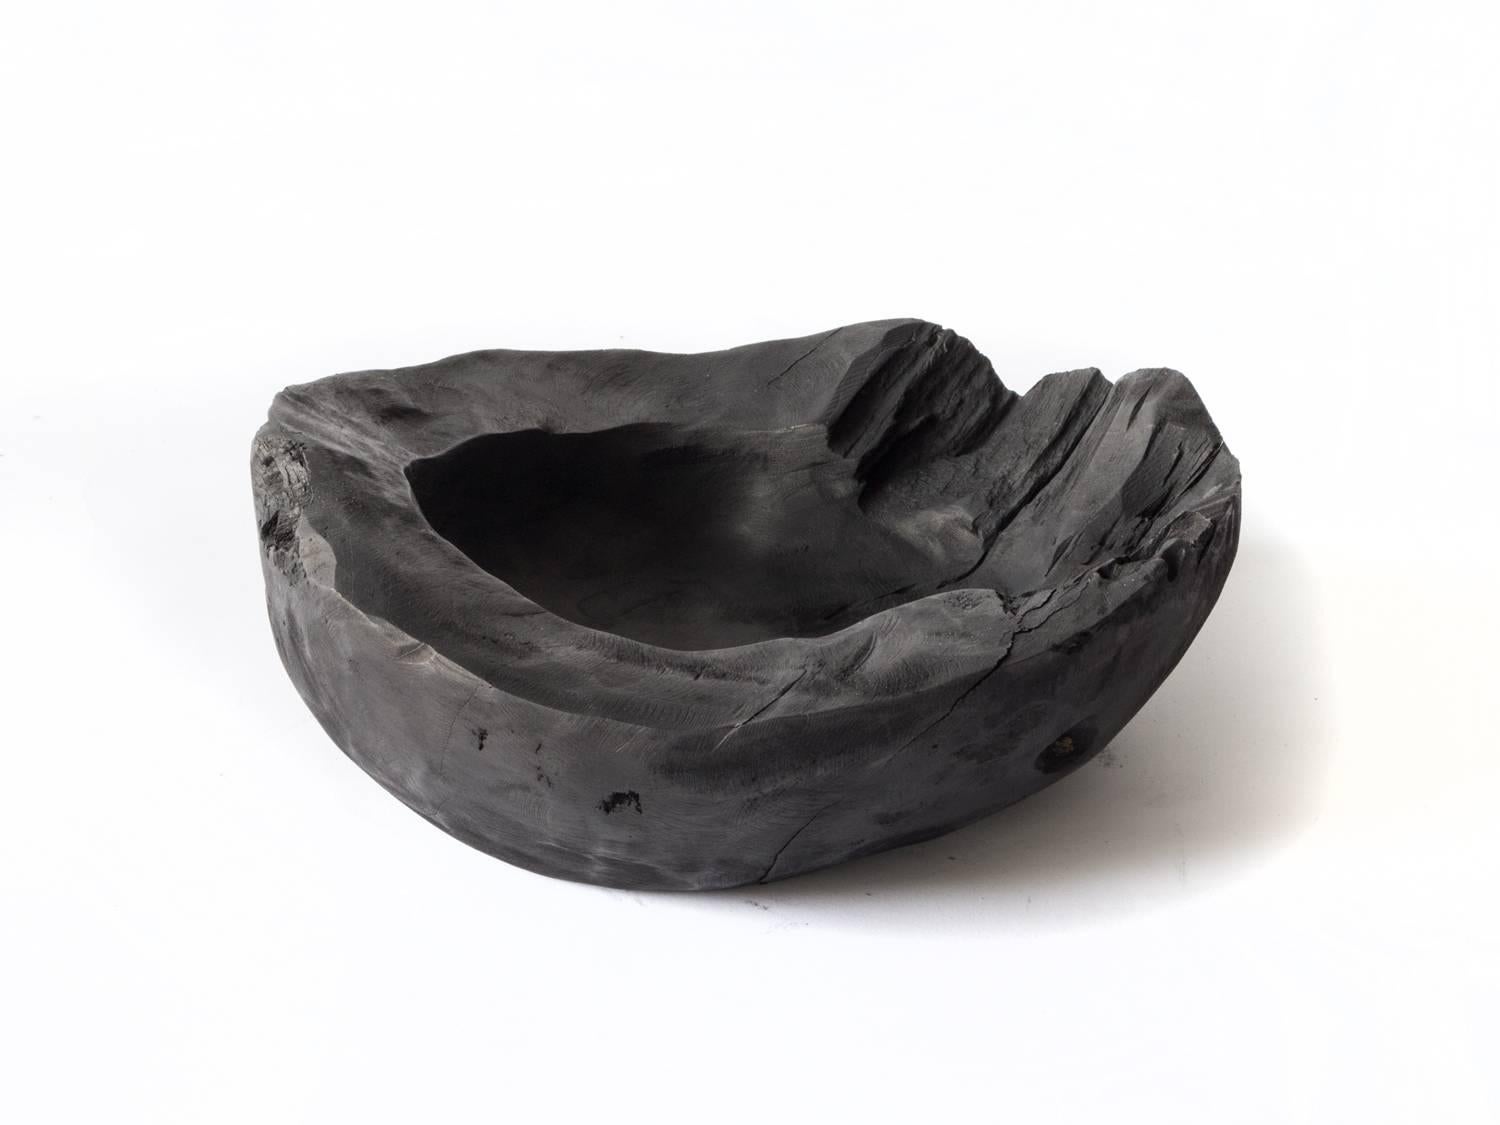 Hand-Carved Reclaimed Wood Bowl by Lukas Machnik available from LMD/studio.

One-of-a-kind hand-carved reclaimed wood bowl ebonized with calligraphy ink by Lukas Machnik. Each bowl is entirely unique. 

Hand-carved wood bowls by Lukas Machnik are